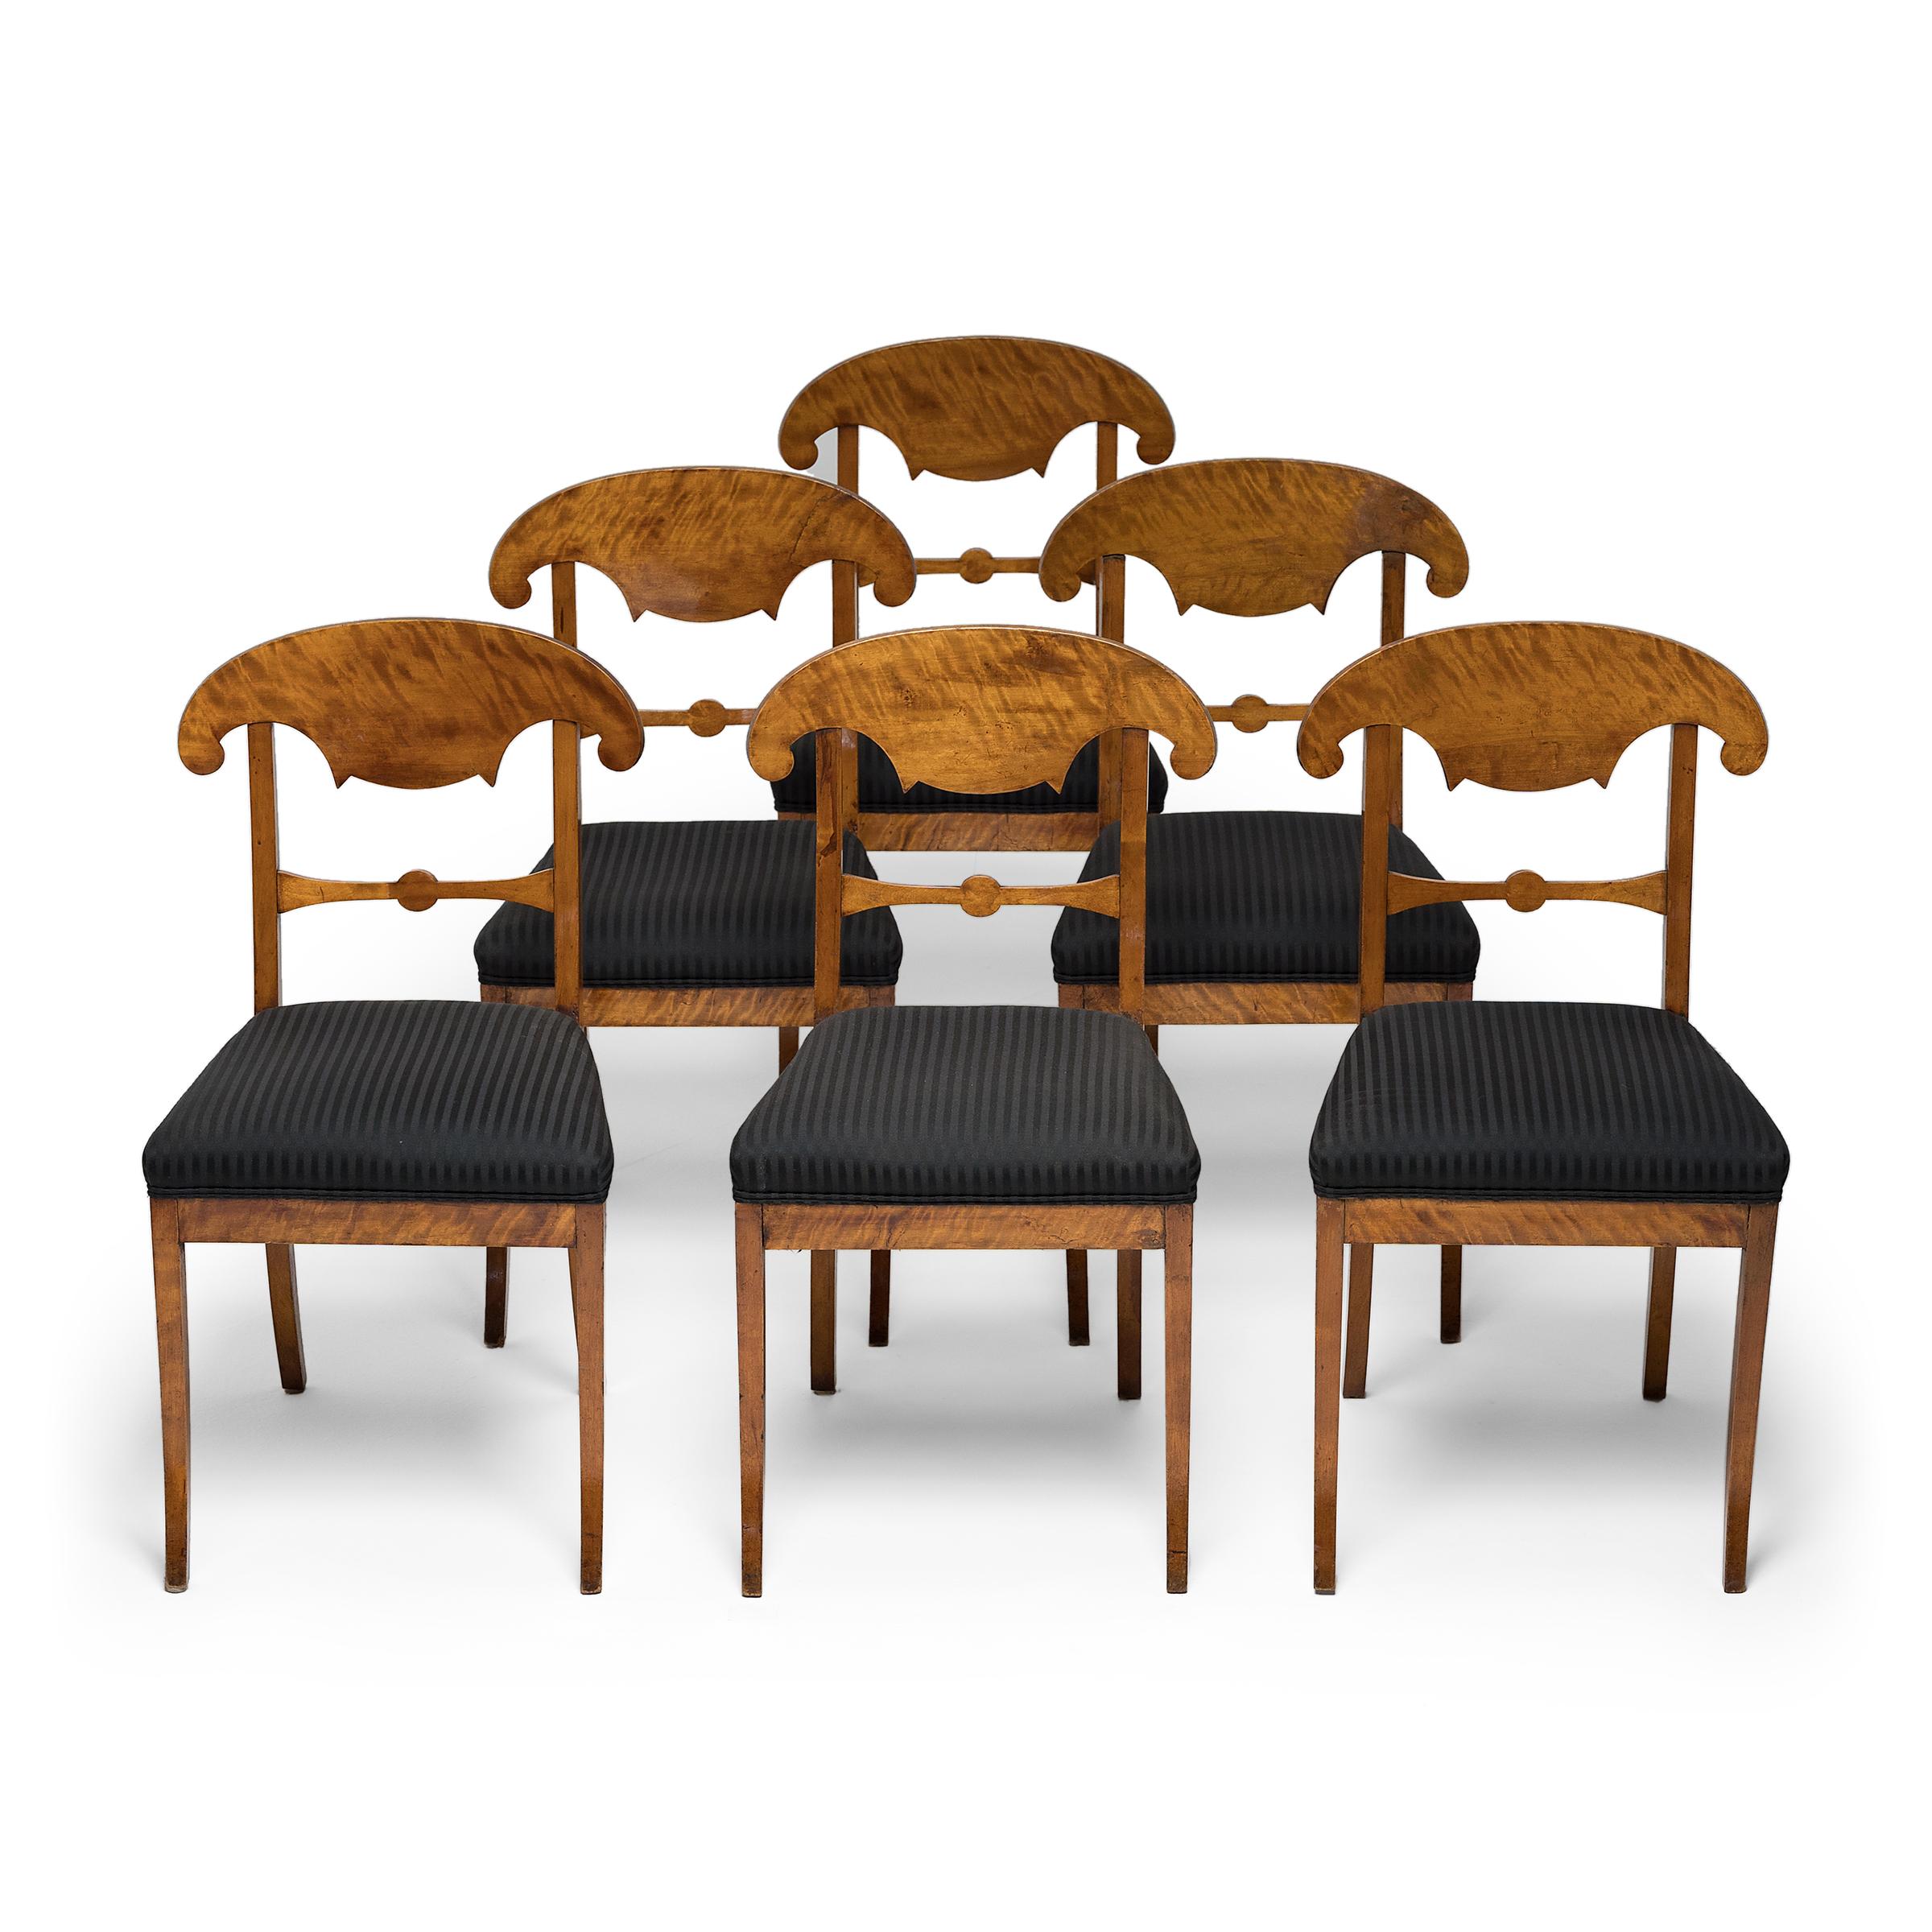 This set of six Biedermeier dining chairs is crafted with the classic lines and elegant simplicity that defined furniture of the Biedermeier period (1815-1848). Considered the first European decorative style driven by middle-class tastes, the